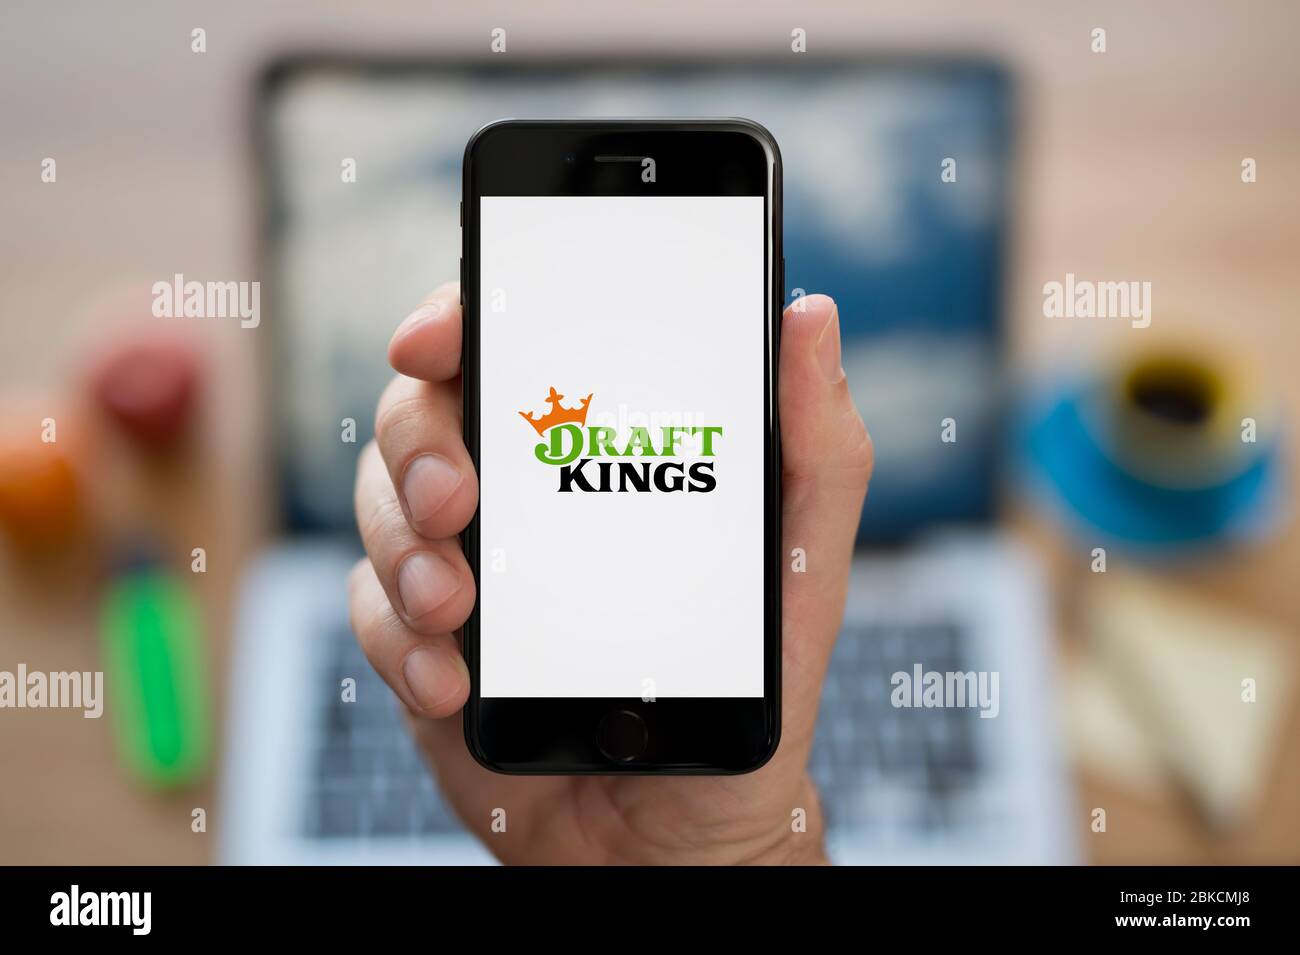 A man looks at his iPhone which displays the Draft Kings logo (Editorial use only). Stock Photo